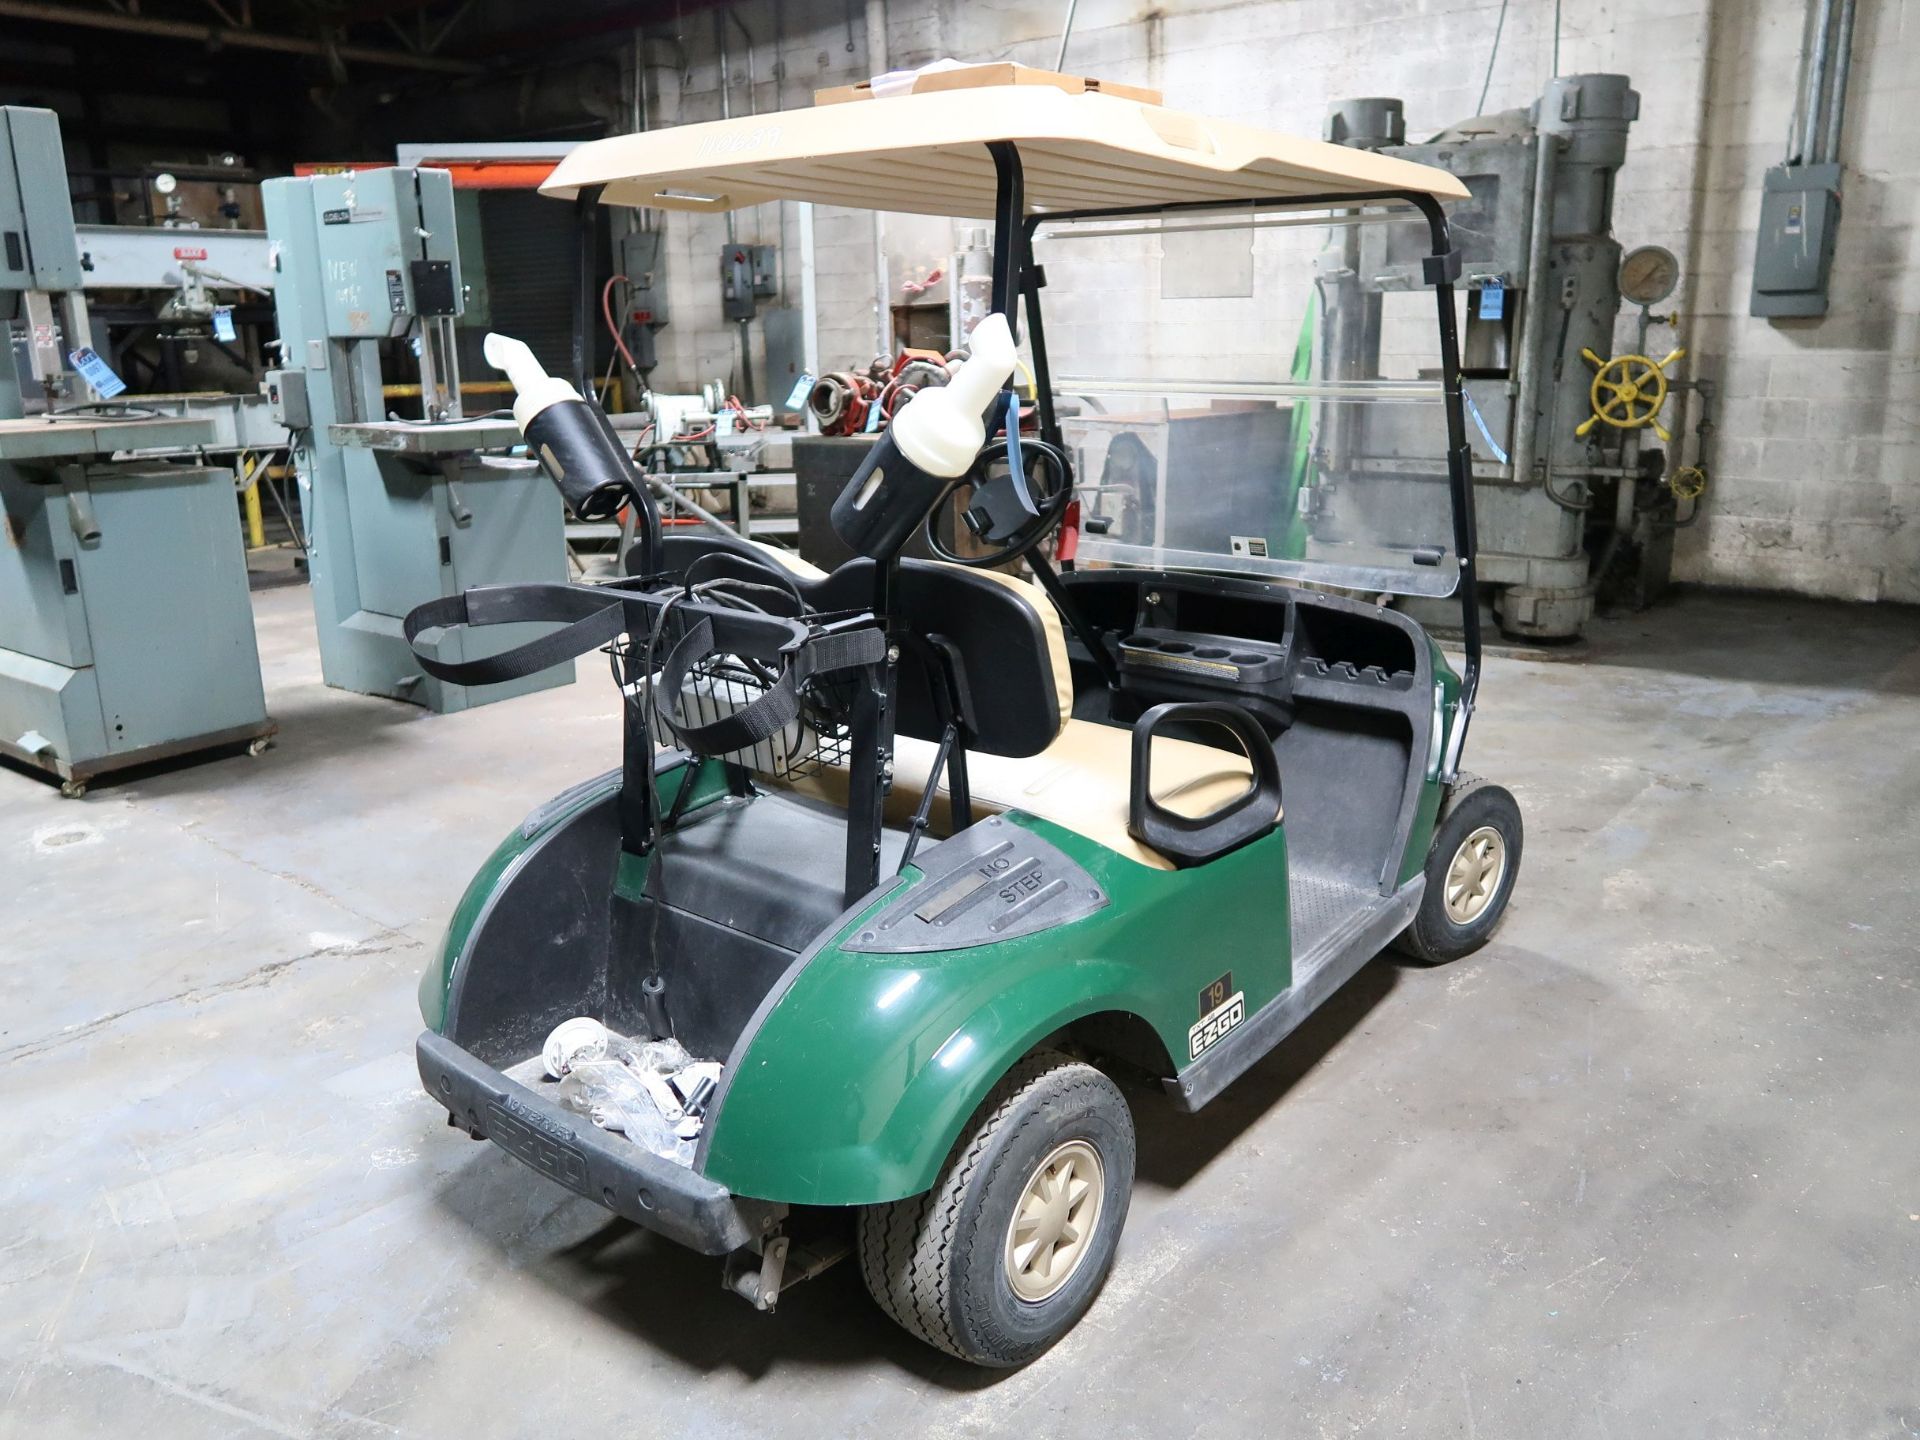 EZ-GO ELECTRIC GOLF CART WITH CHARGER, 48 VOLT - Image 3 of 10